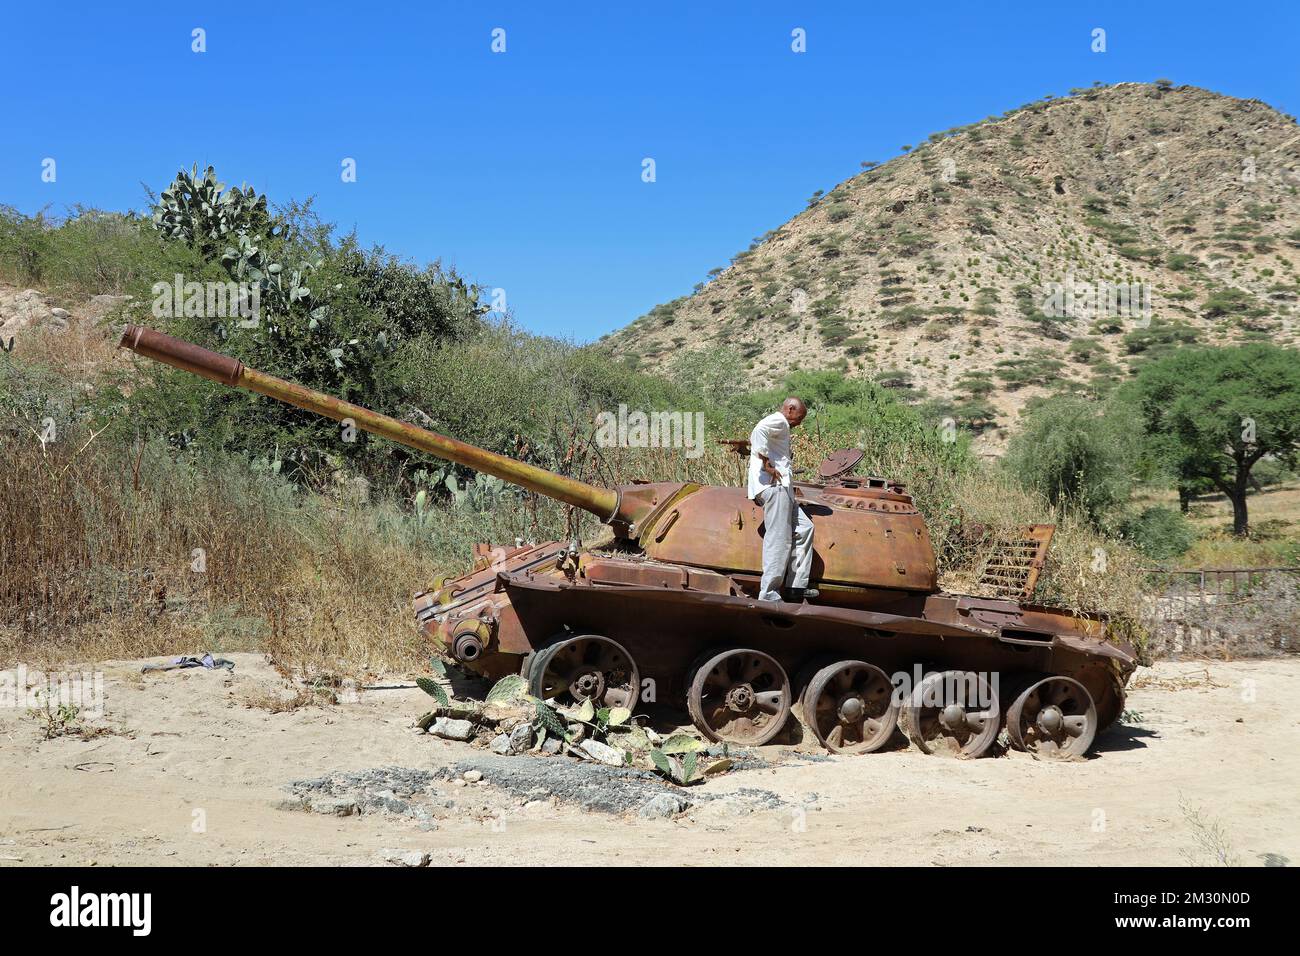 Tourist standing on an old army tank in Eritrea which was left in the countryside after the civil war Stock Photo